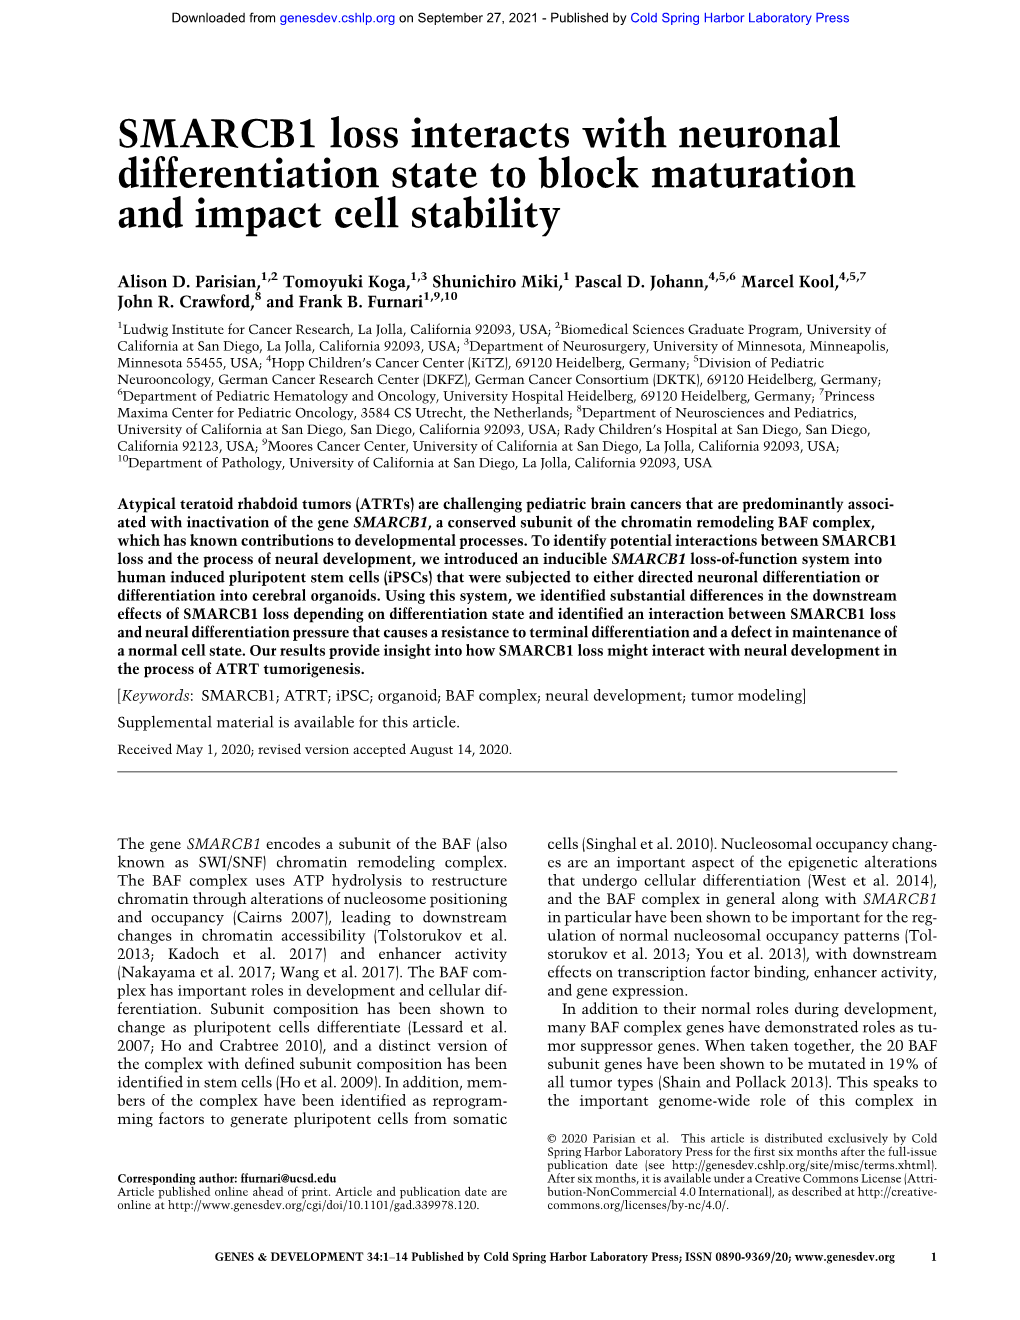 SMARCB1 Loss Interacts with Neuronal Differentiation State to Block Maturation and Impact Cell Stability